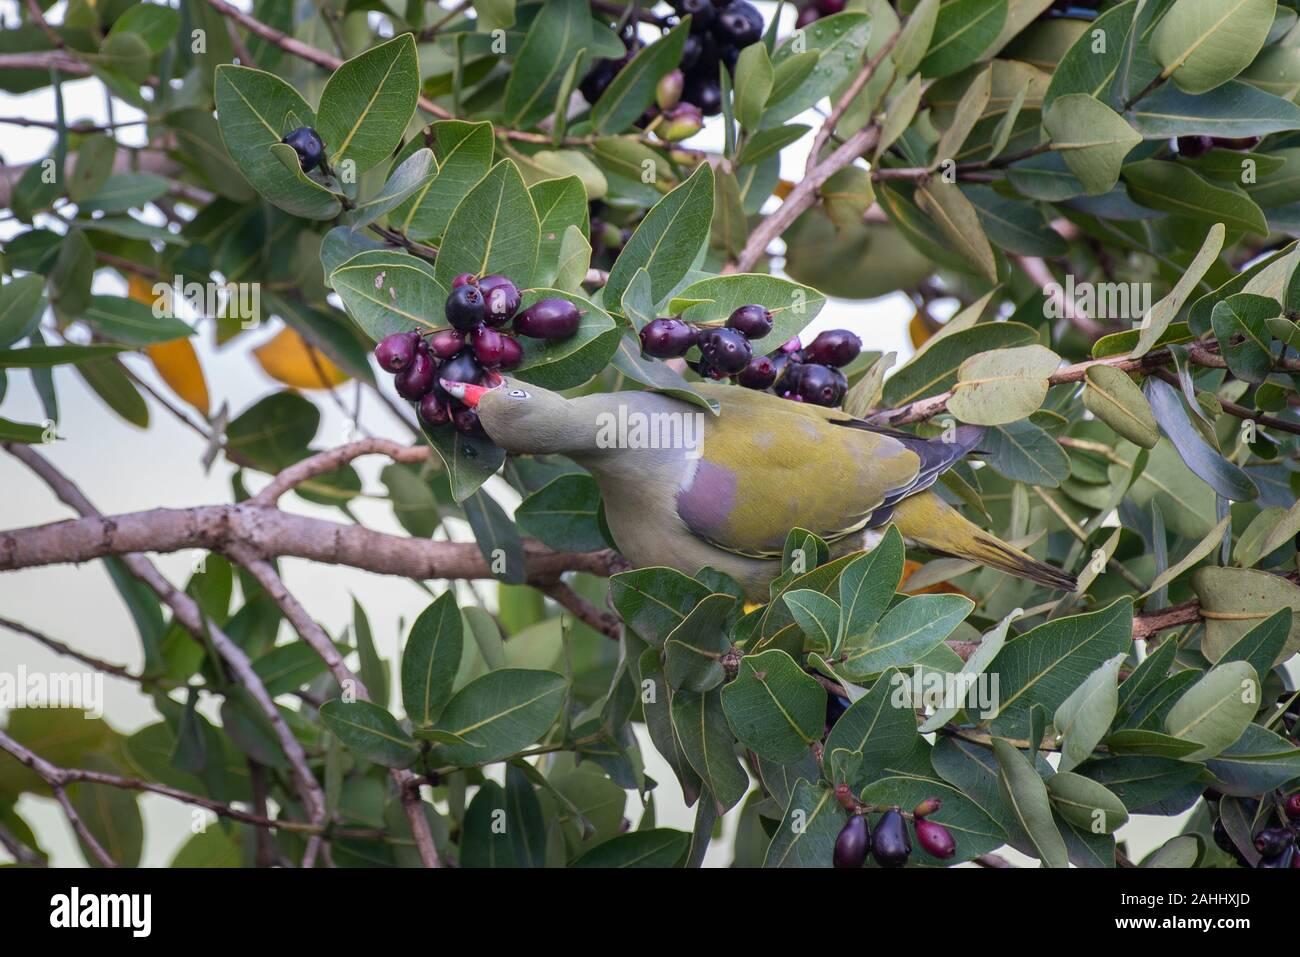 An African Green Pigeon - Treron calvus - feastes on berries in a waterberry tree - Syzgium cordatum - laden with ripe berries Stock Photo